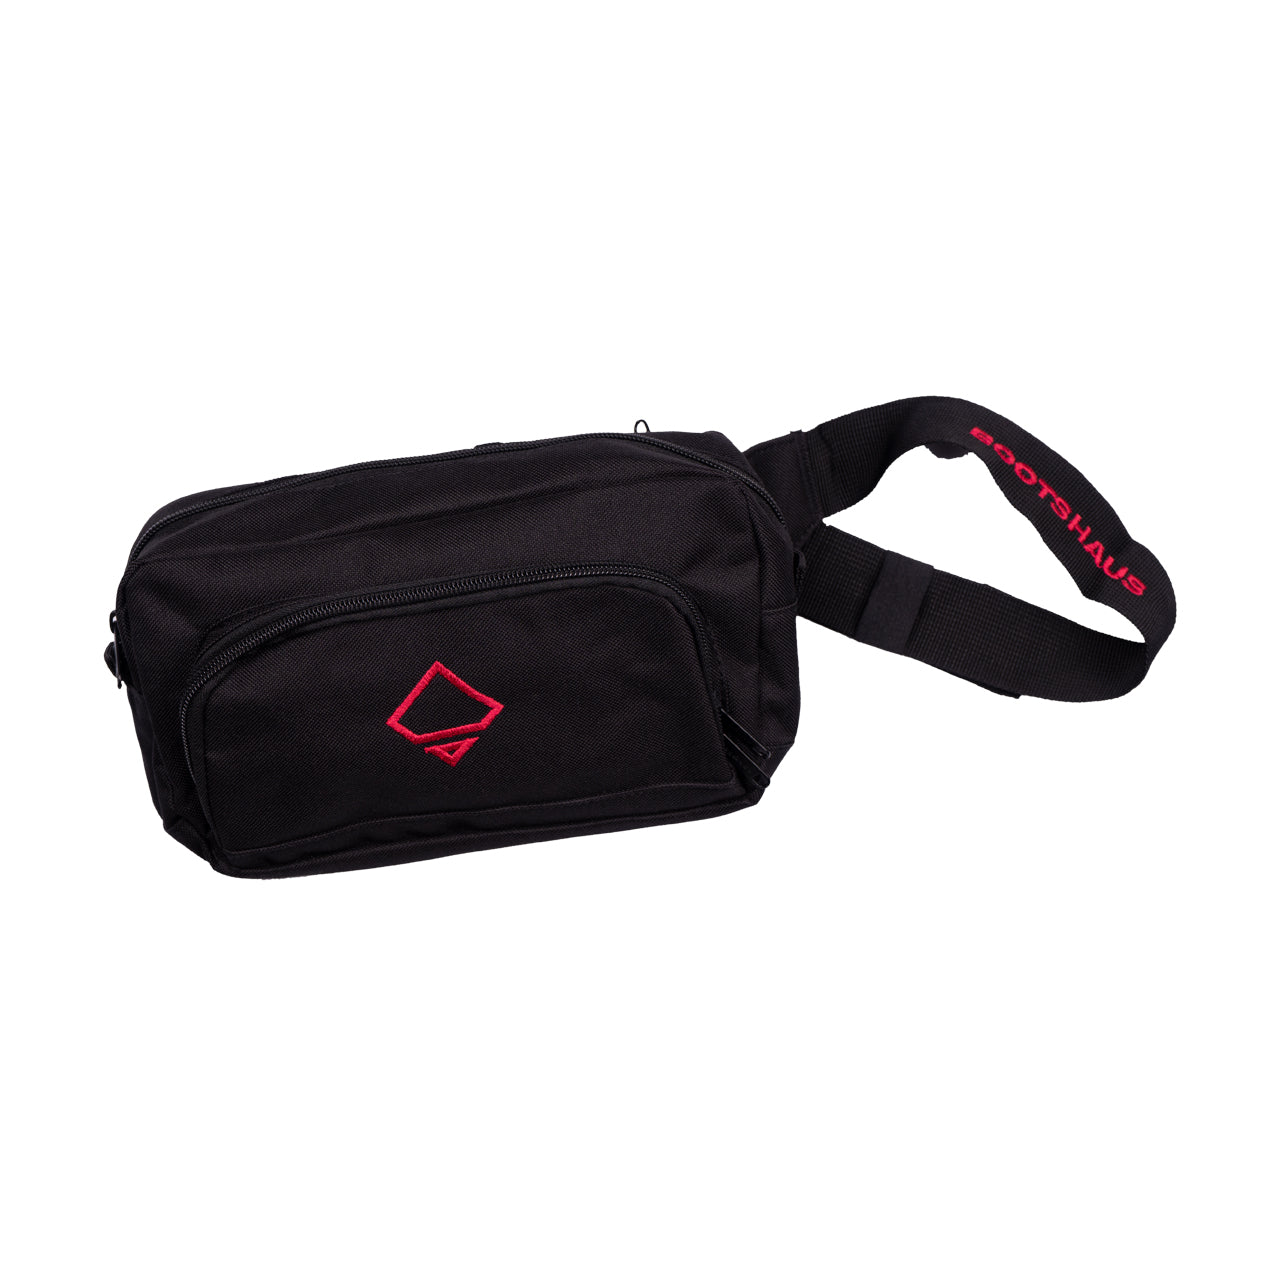 Bootshaus - Emblem Waistbag (red embroidery)